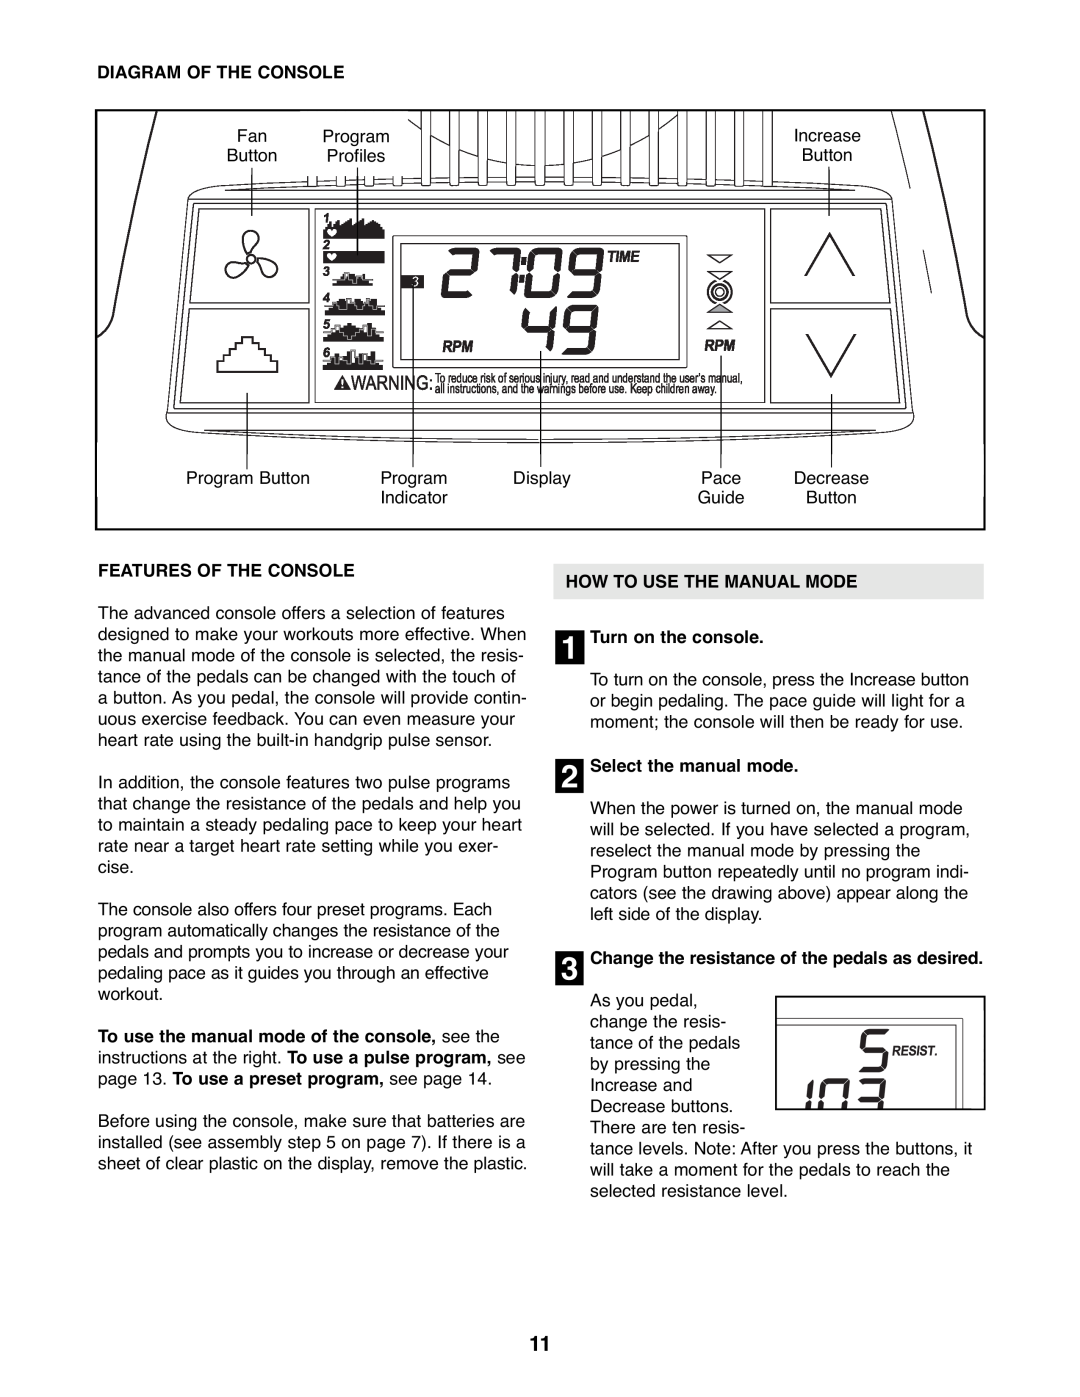 Gold's Gym GGEL62707.0 Diagram Of The Console, Features Of The Console, HOW TO USE THE MANUAL MODE 1 Turn on the console 